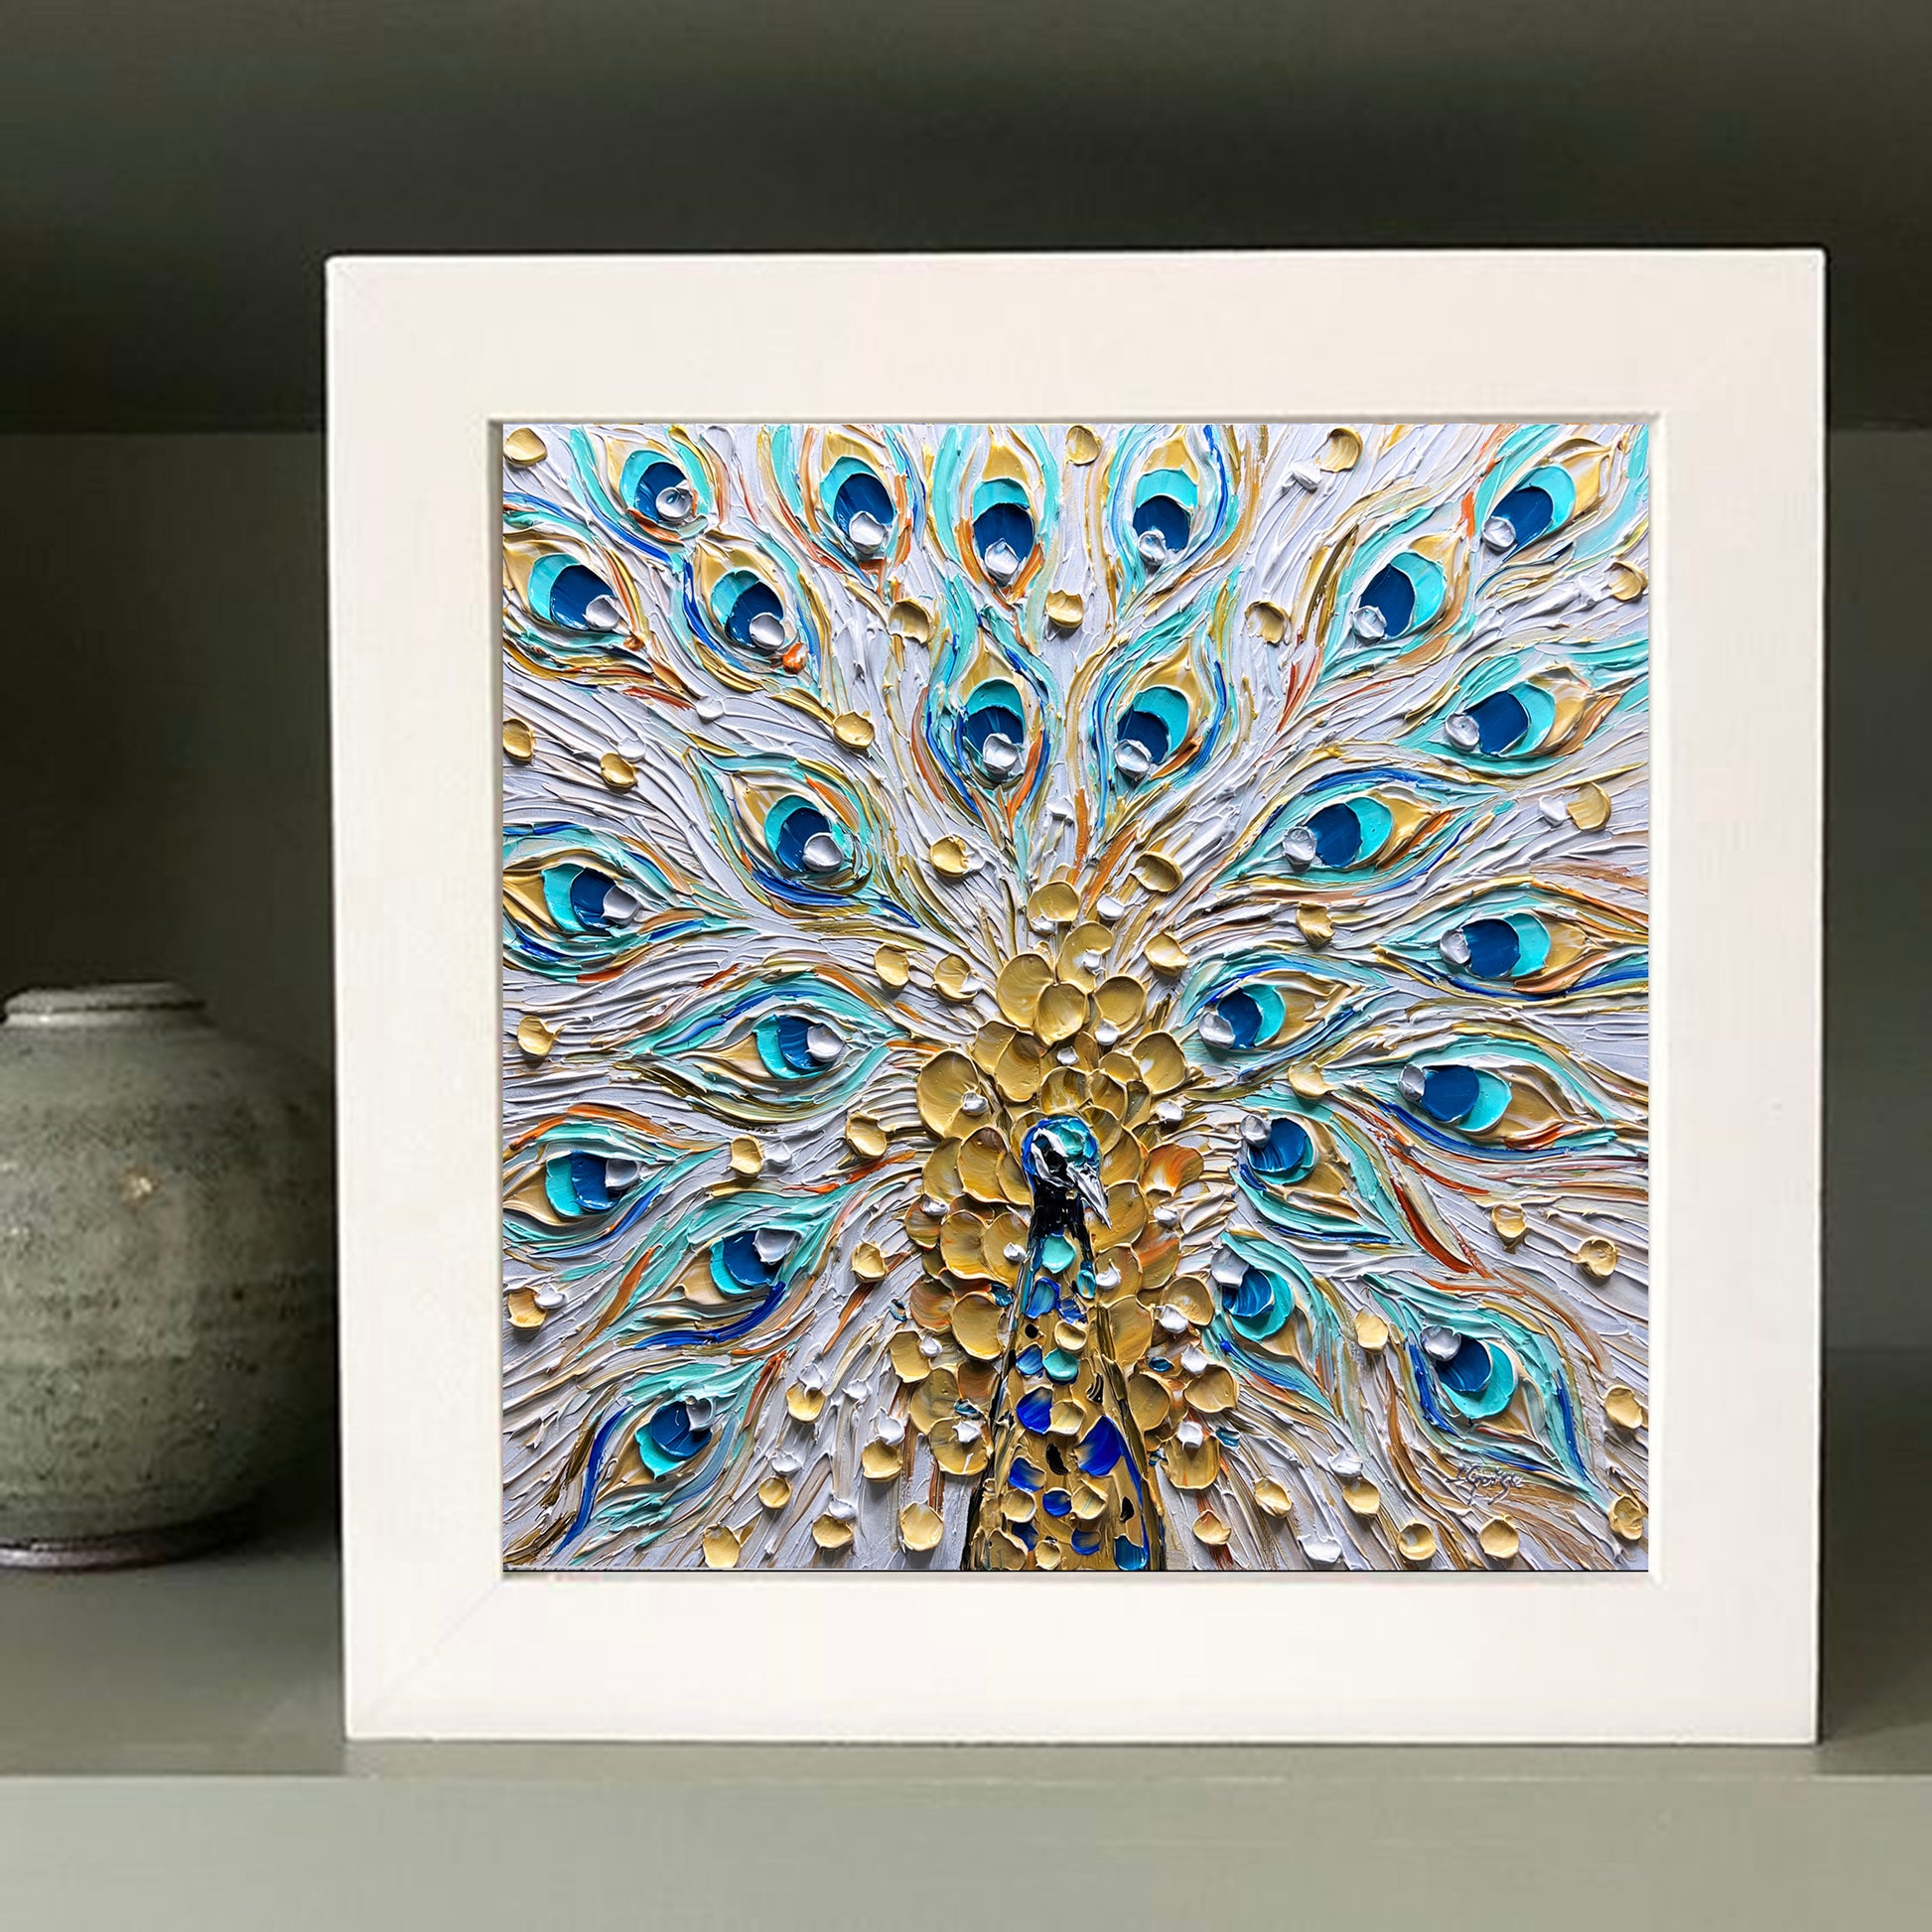 a picture of a peacock's feathers on a shelf